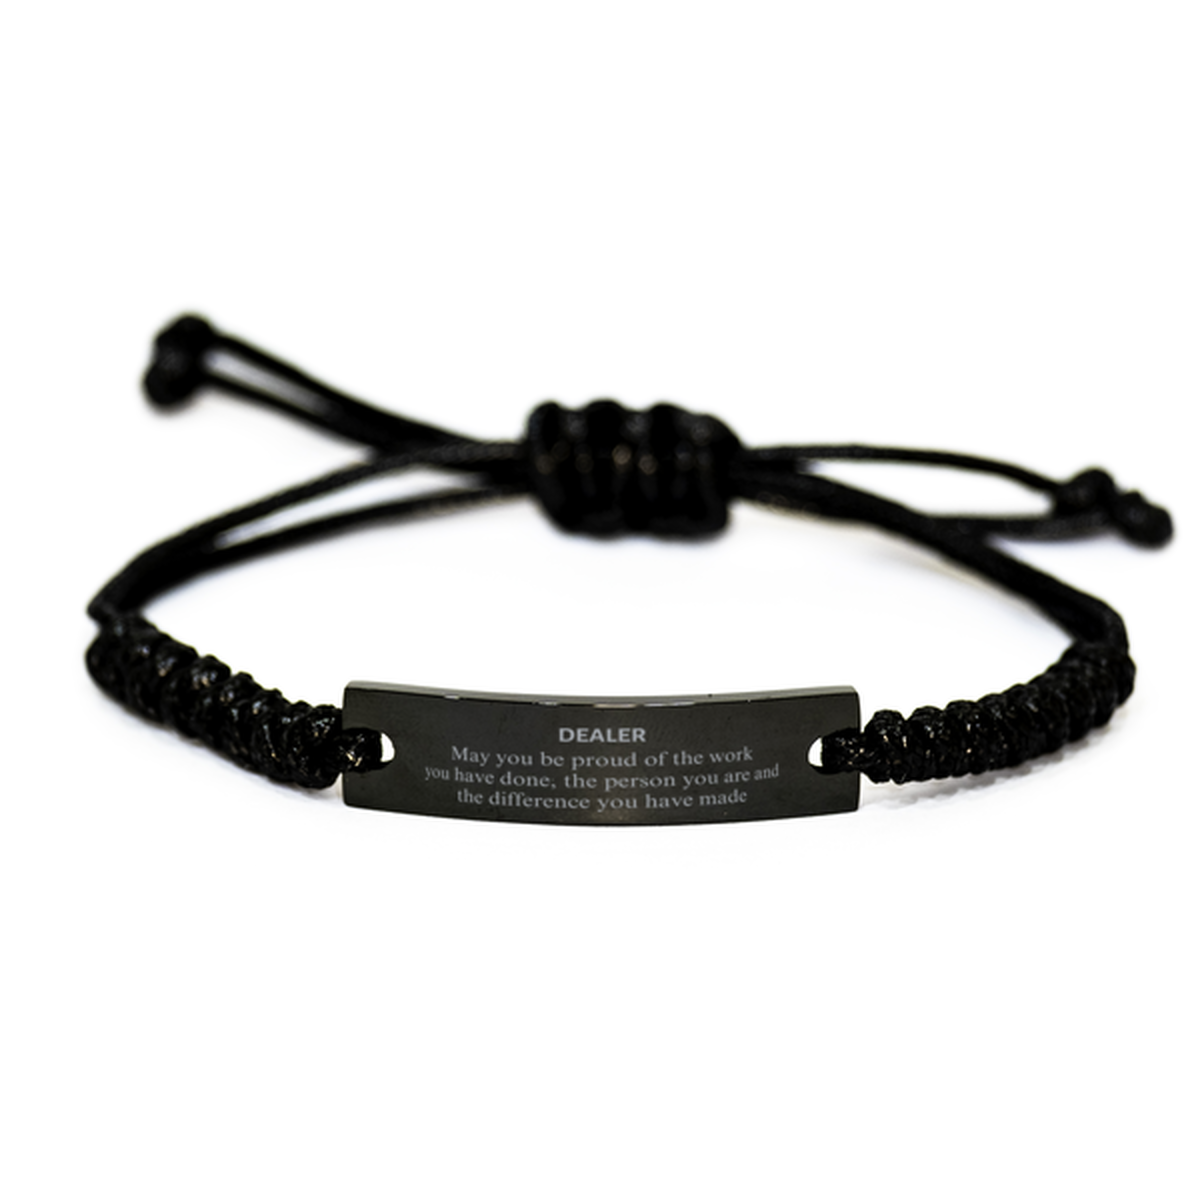 Dealer May you be proud of the work you have done, Retirement Dealer Black Rope Bracelet for Colleague Appreciation Gifts Amazing for Dealer